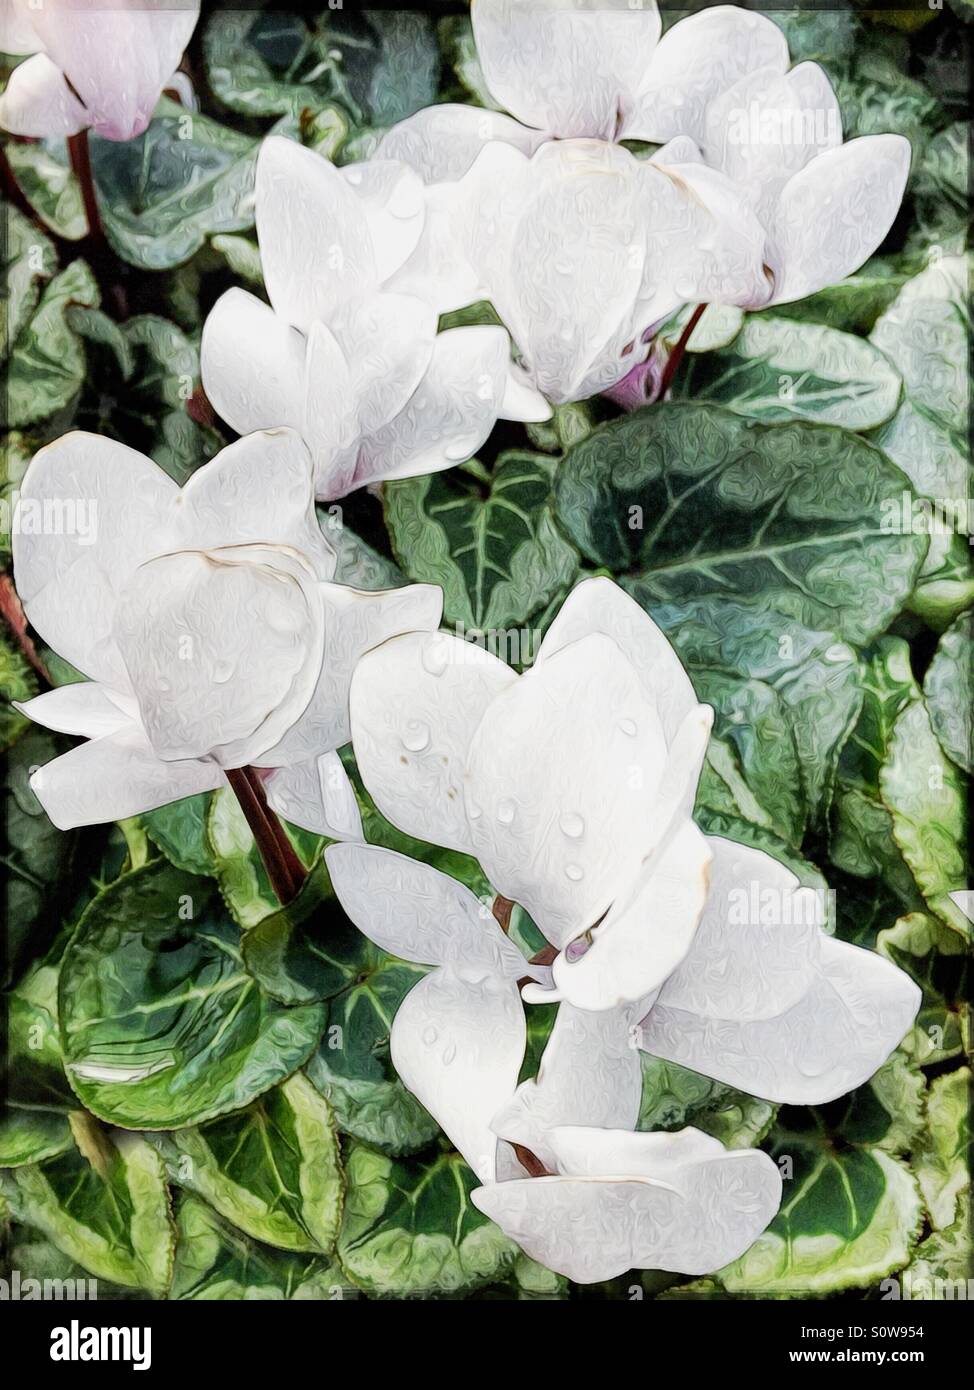 White cyclamen flowers with raindrops on the petals. Stock Photo